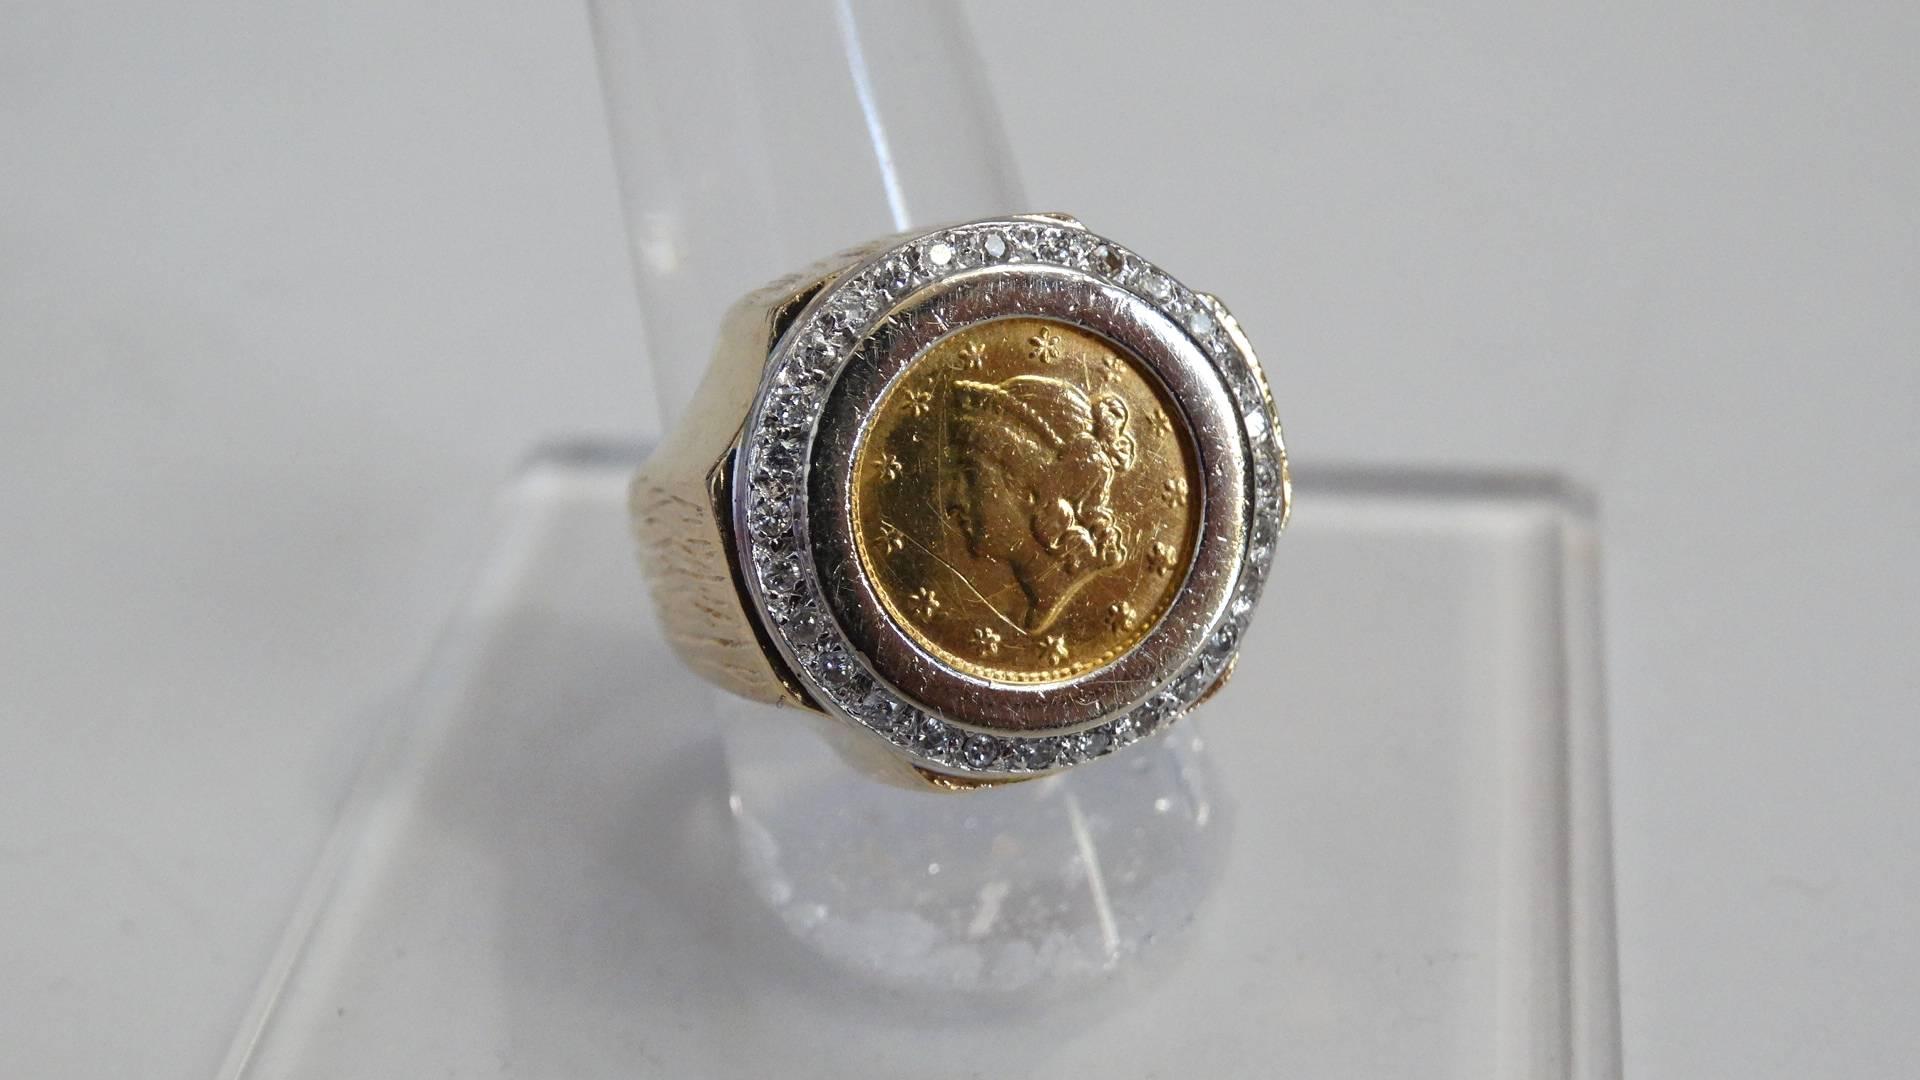 22k solid gold coin ring-antique gold coin ring solid gold early coin ring-floral designed